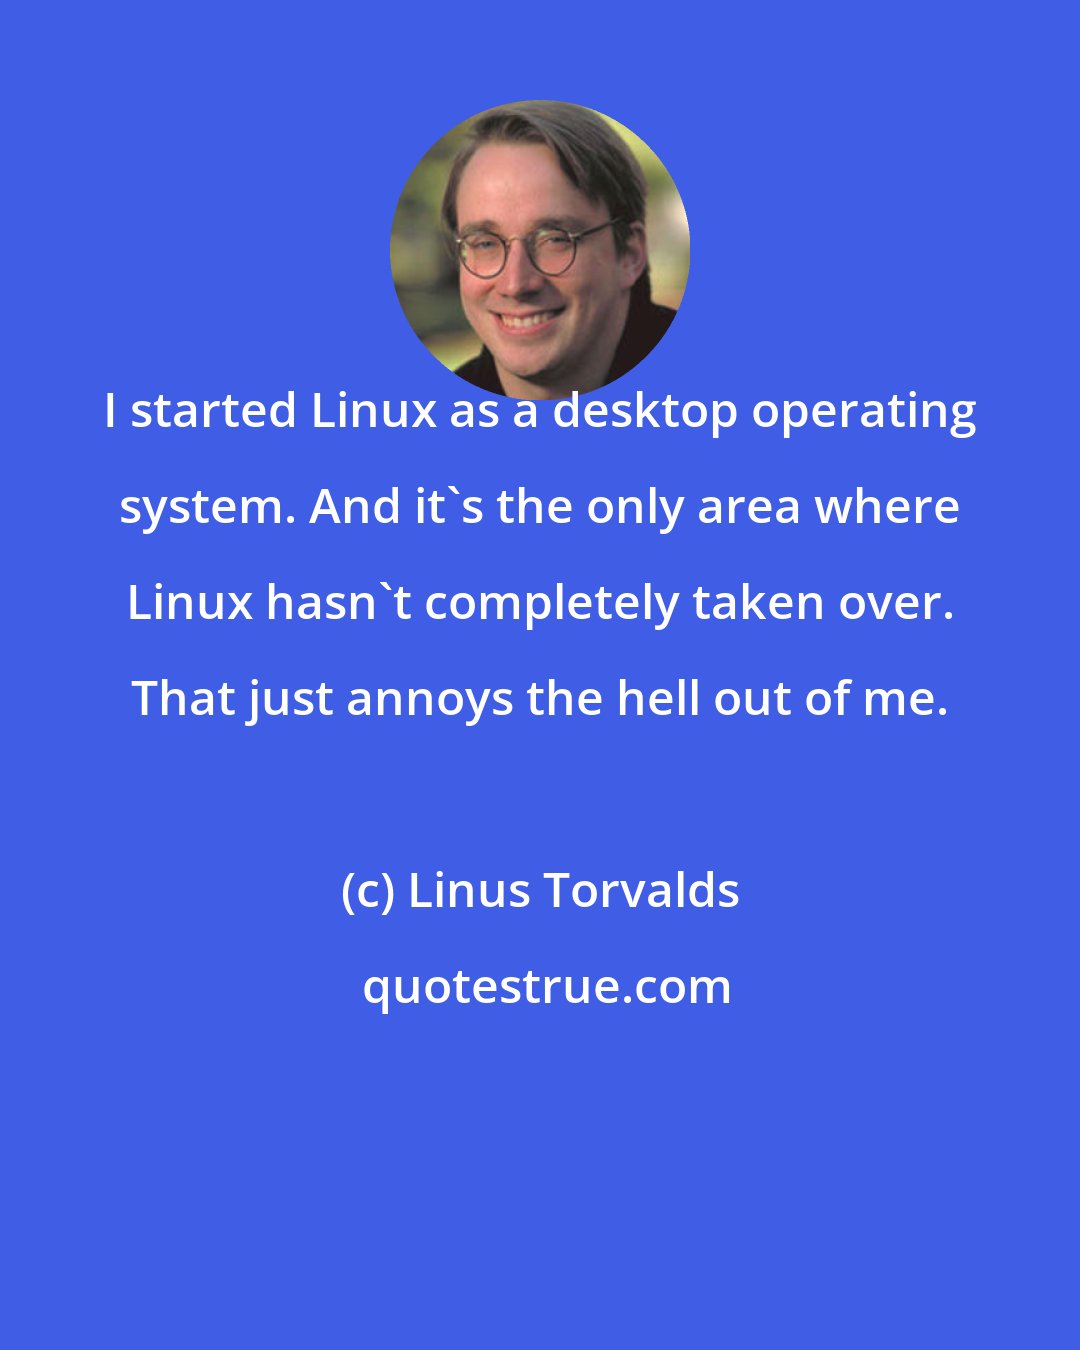 Linus Torvalds: I started Linux as a desktop operating system. And it's the only area where Linux hasn't completely taken over. That just annoys the hell out of me.